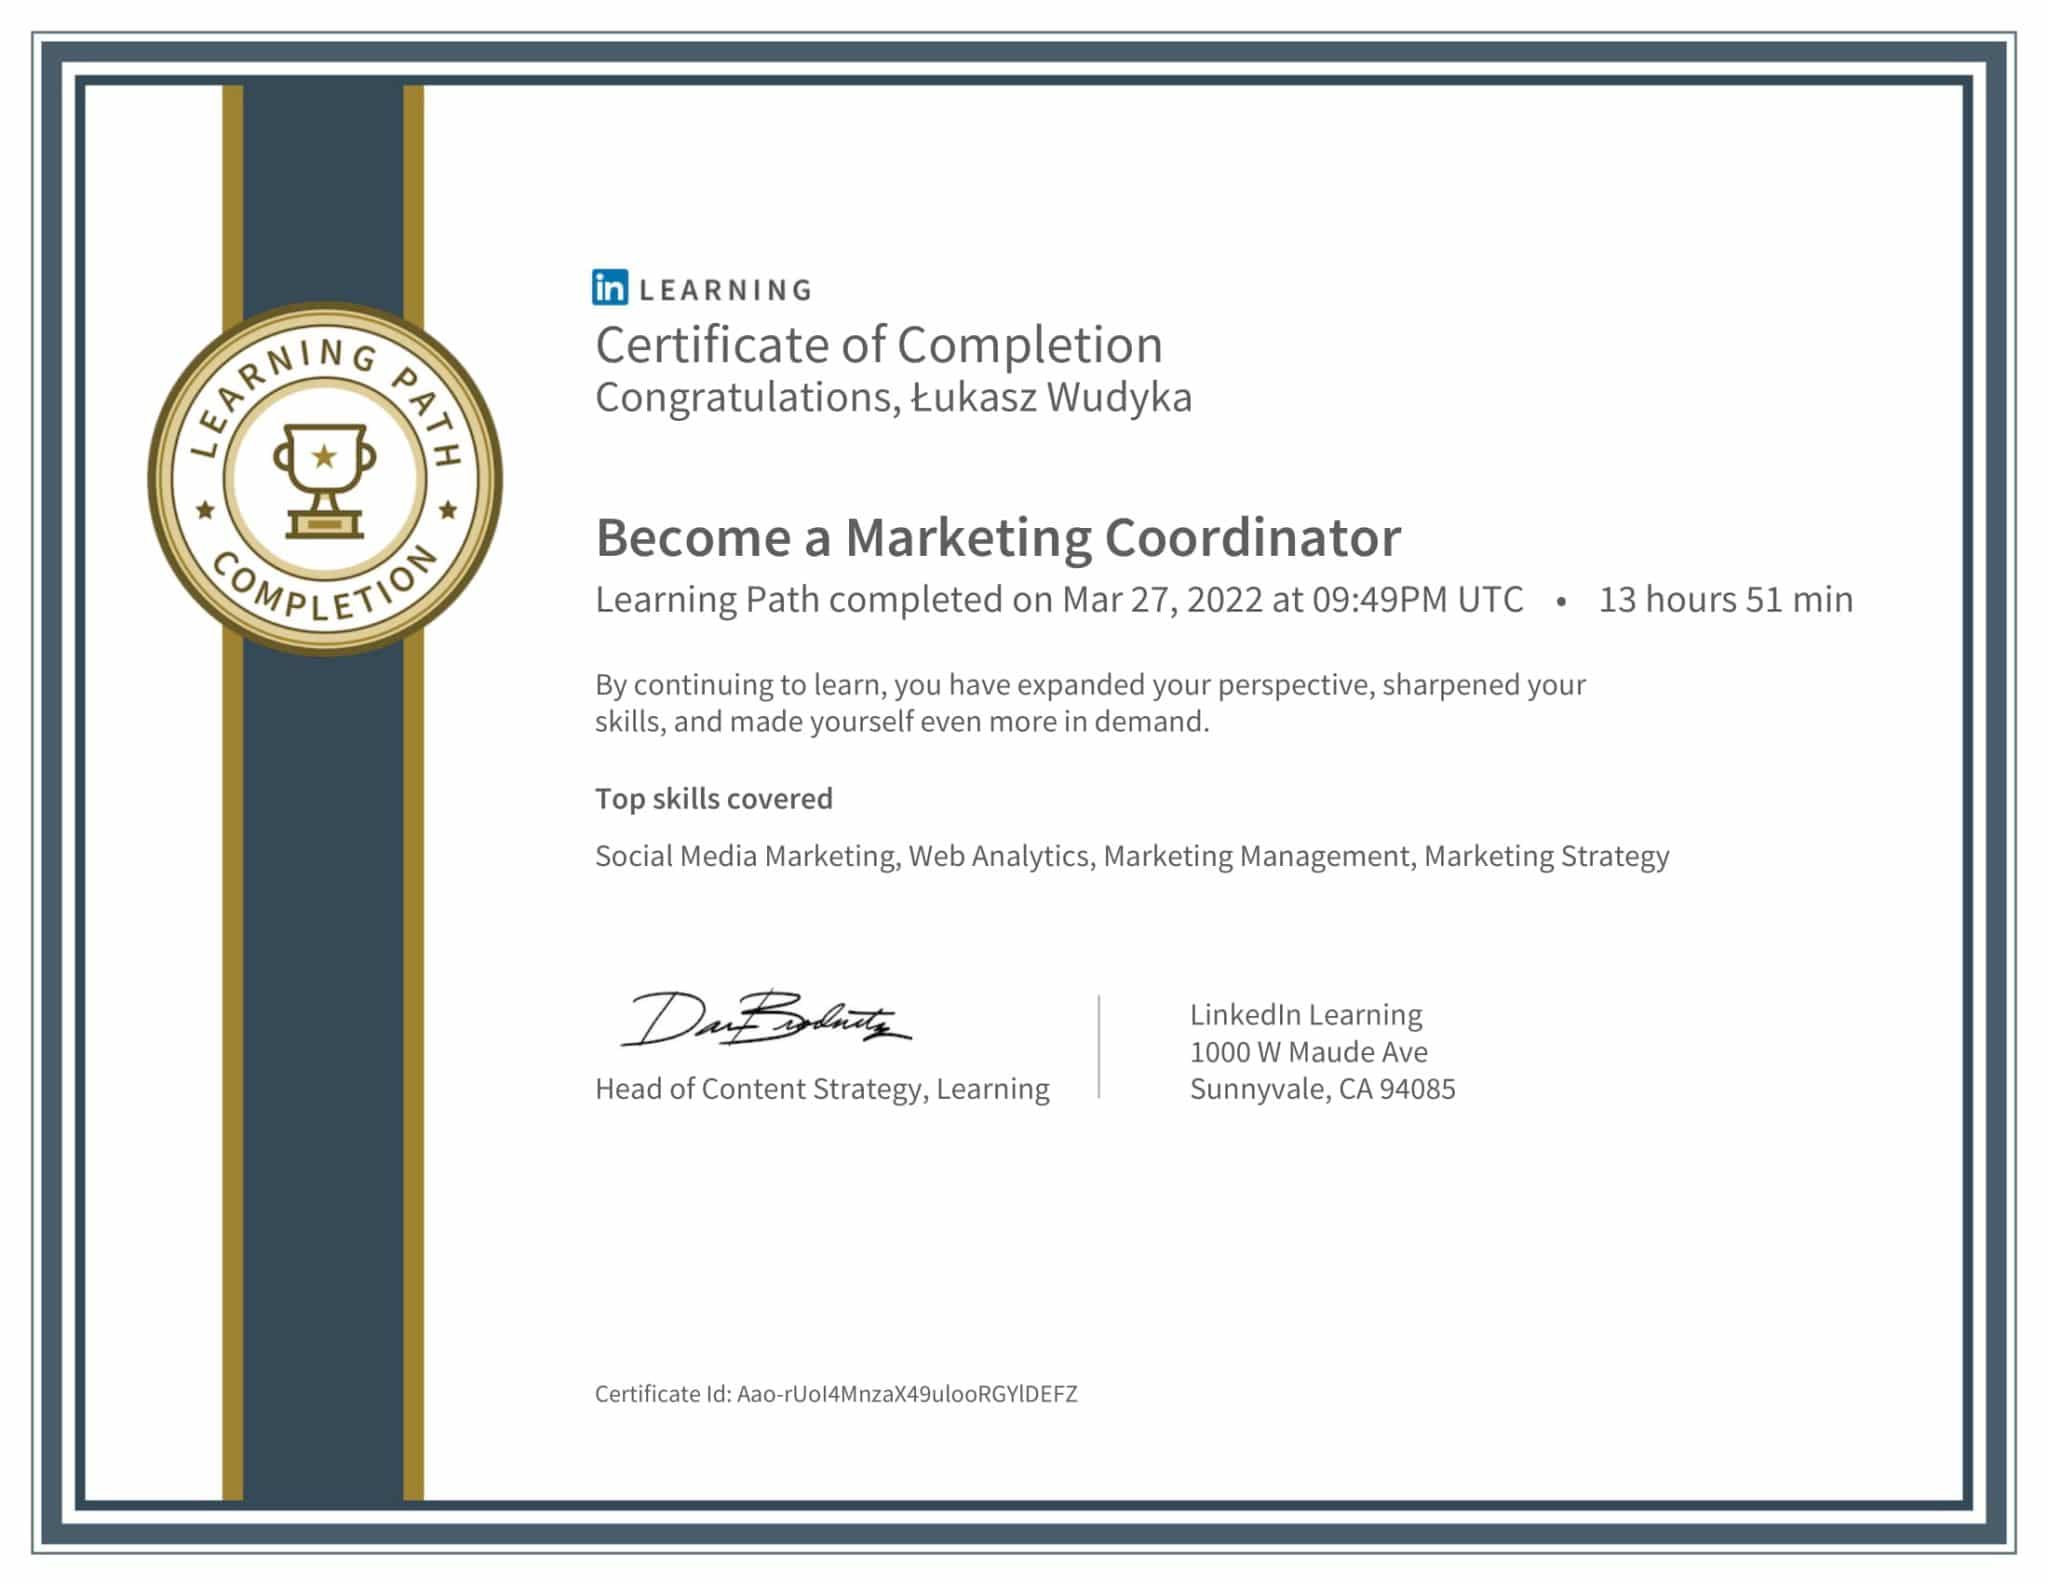 CertificateOfCompletion_Become a Marketing Coordinator-1